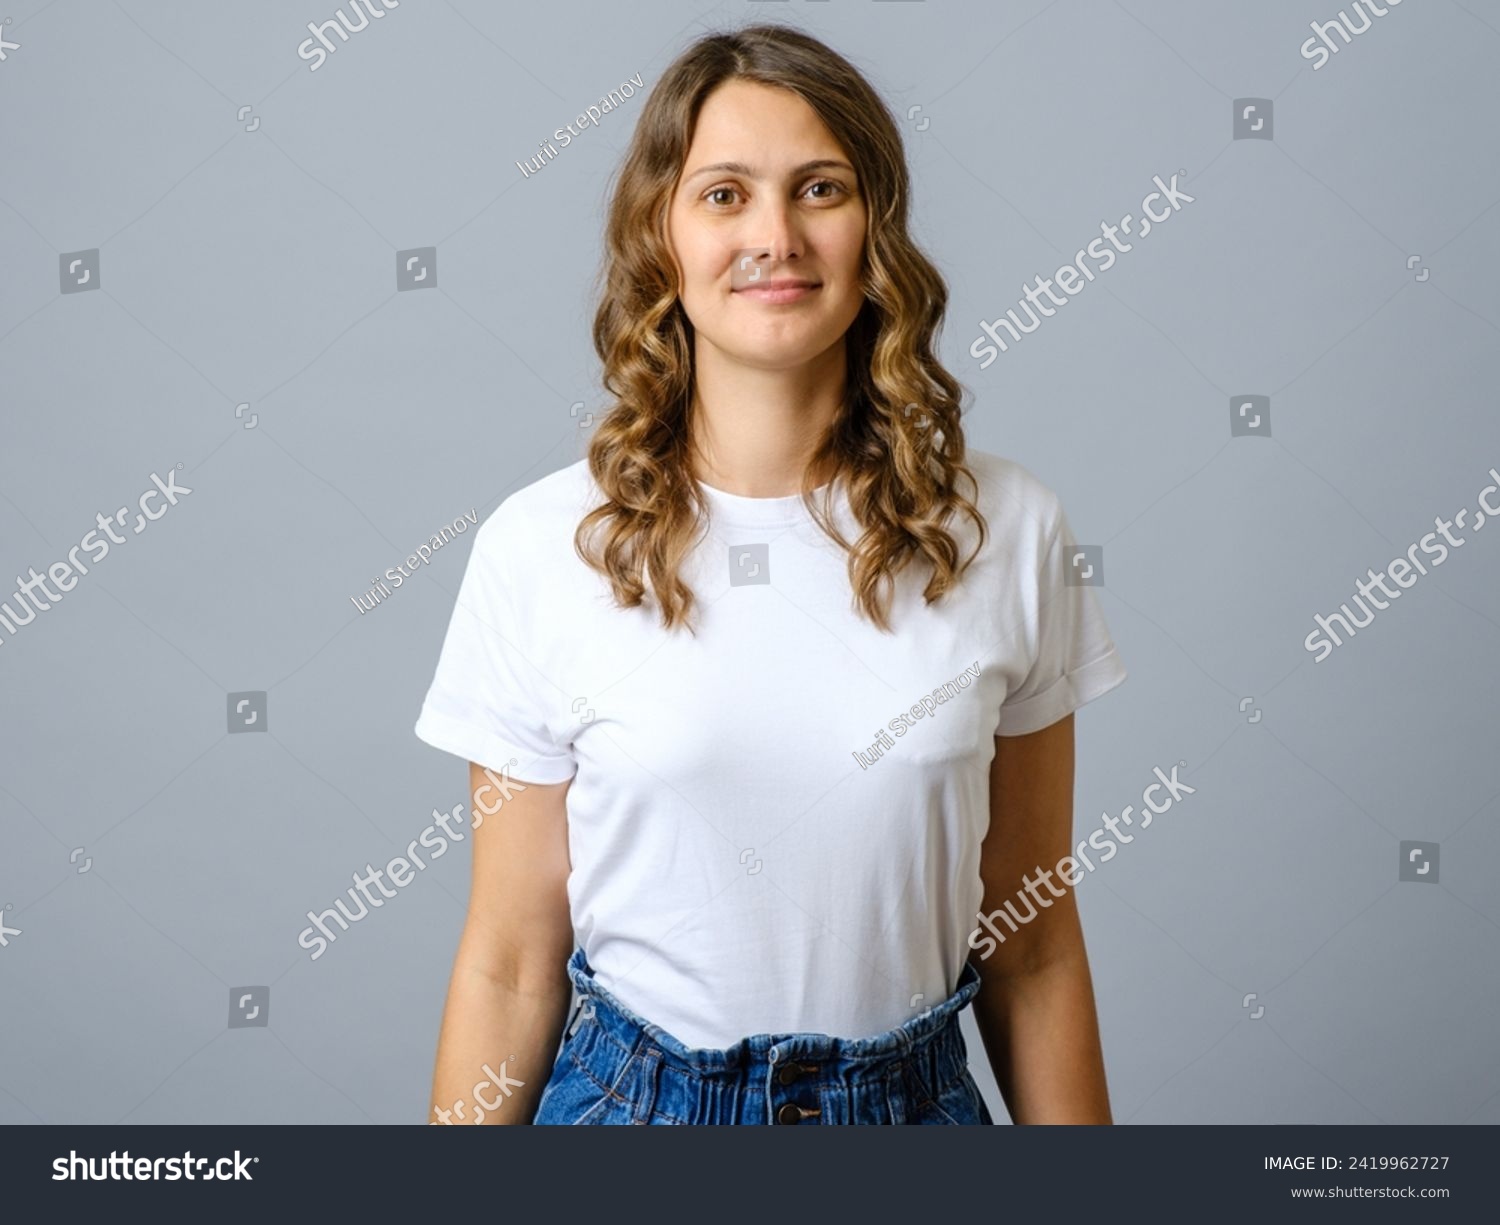 Happy successful woman in casual outfit smiling at camera and looking confident against gray background #2419962727